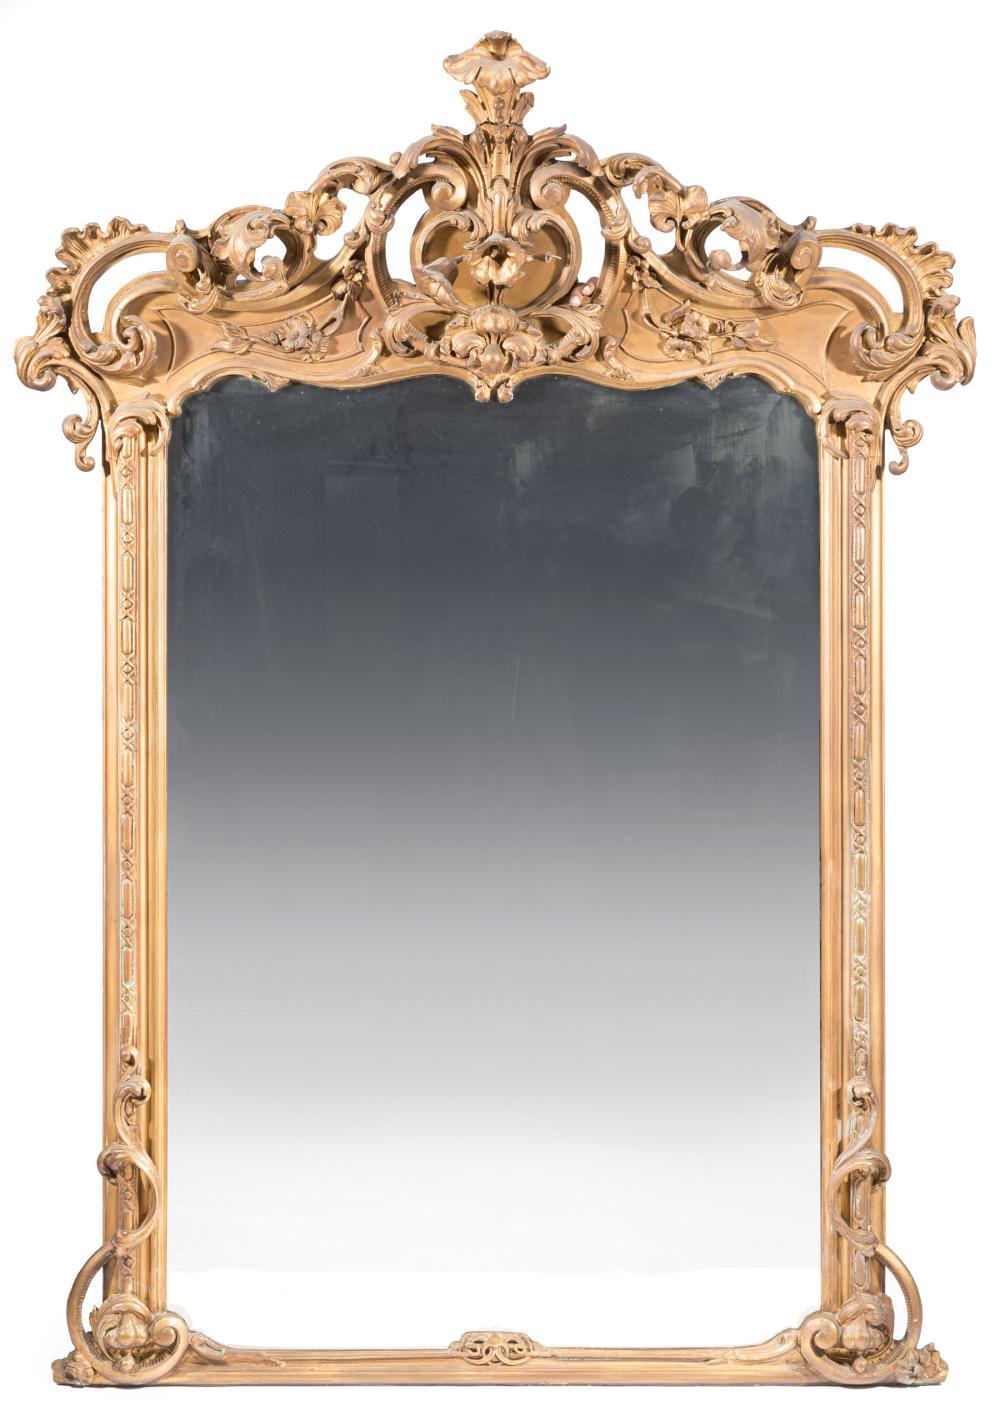 ROCOCO REVIVAL CARVED AND GILT 31a106